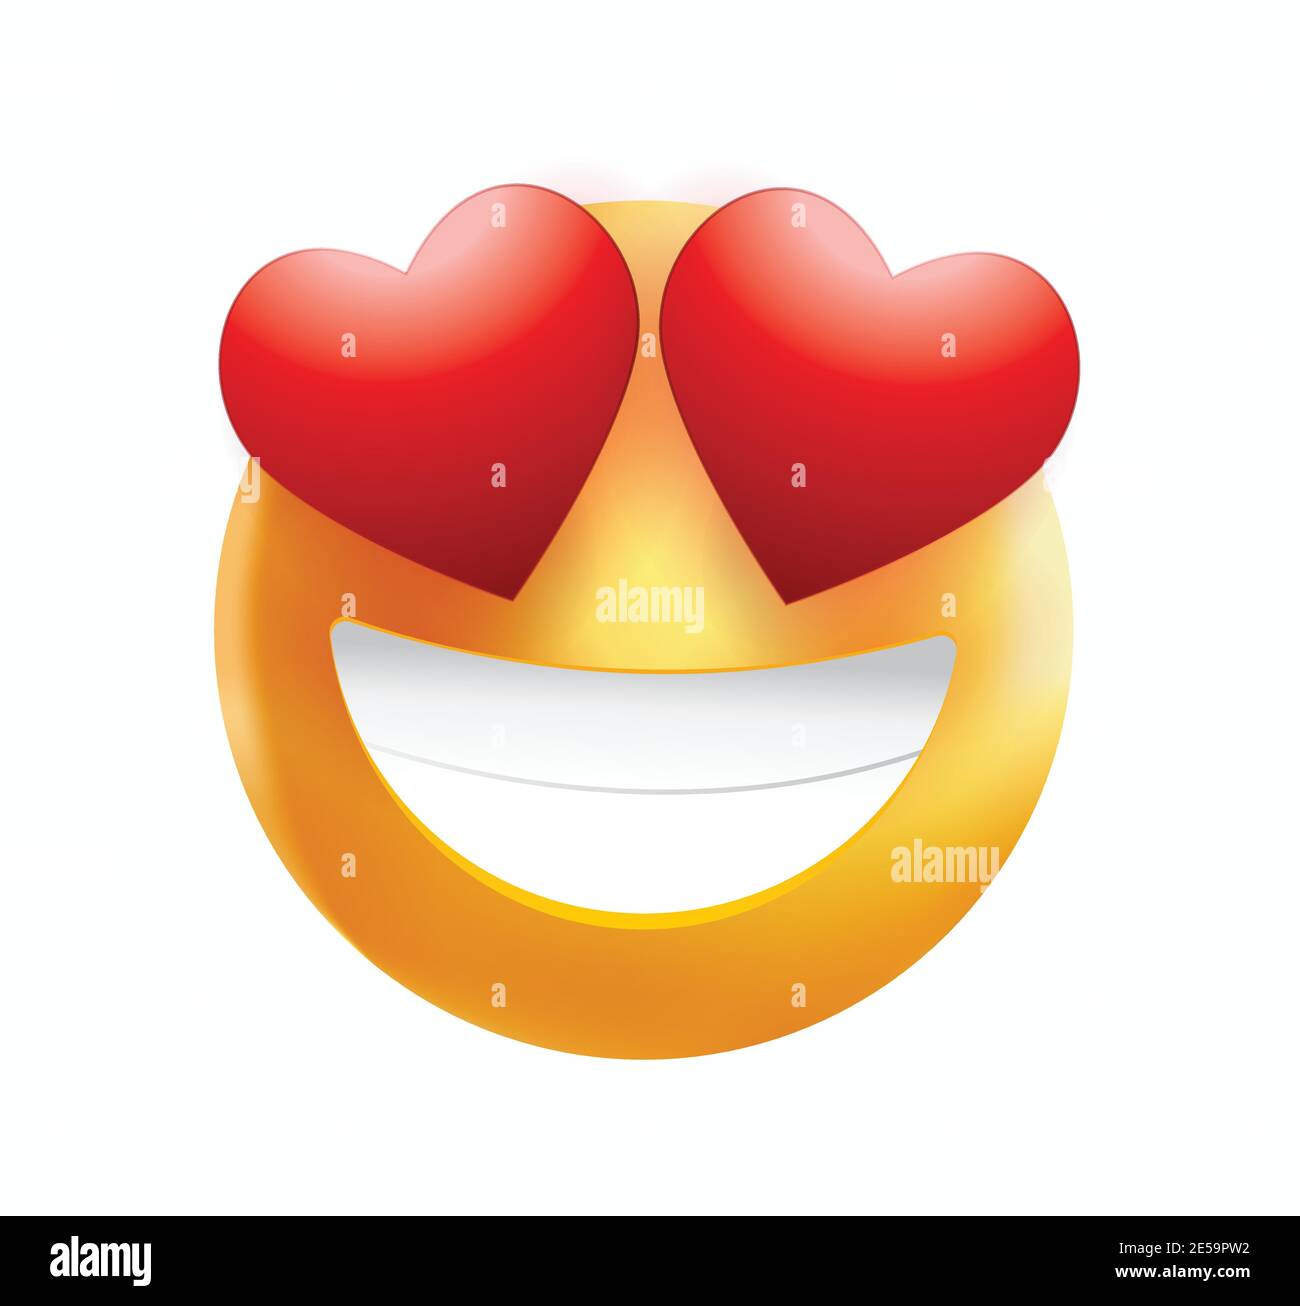 High quality emoticon smiling, love emoji isolated on white background. Yellow face emoji with red heart eyes and smile vector illustration. Stock Vector